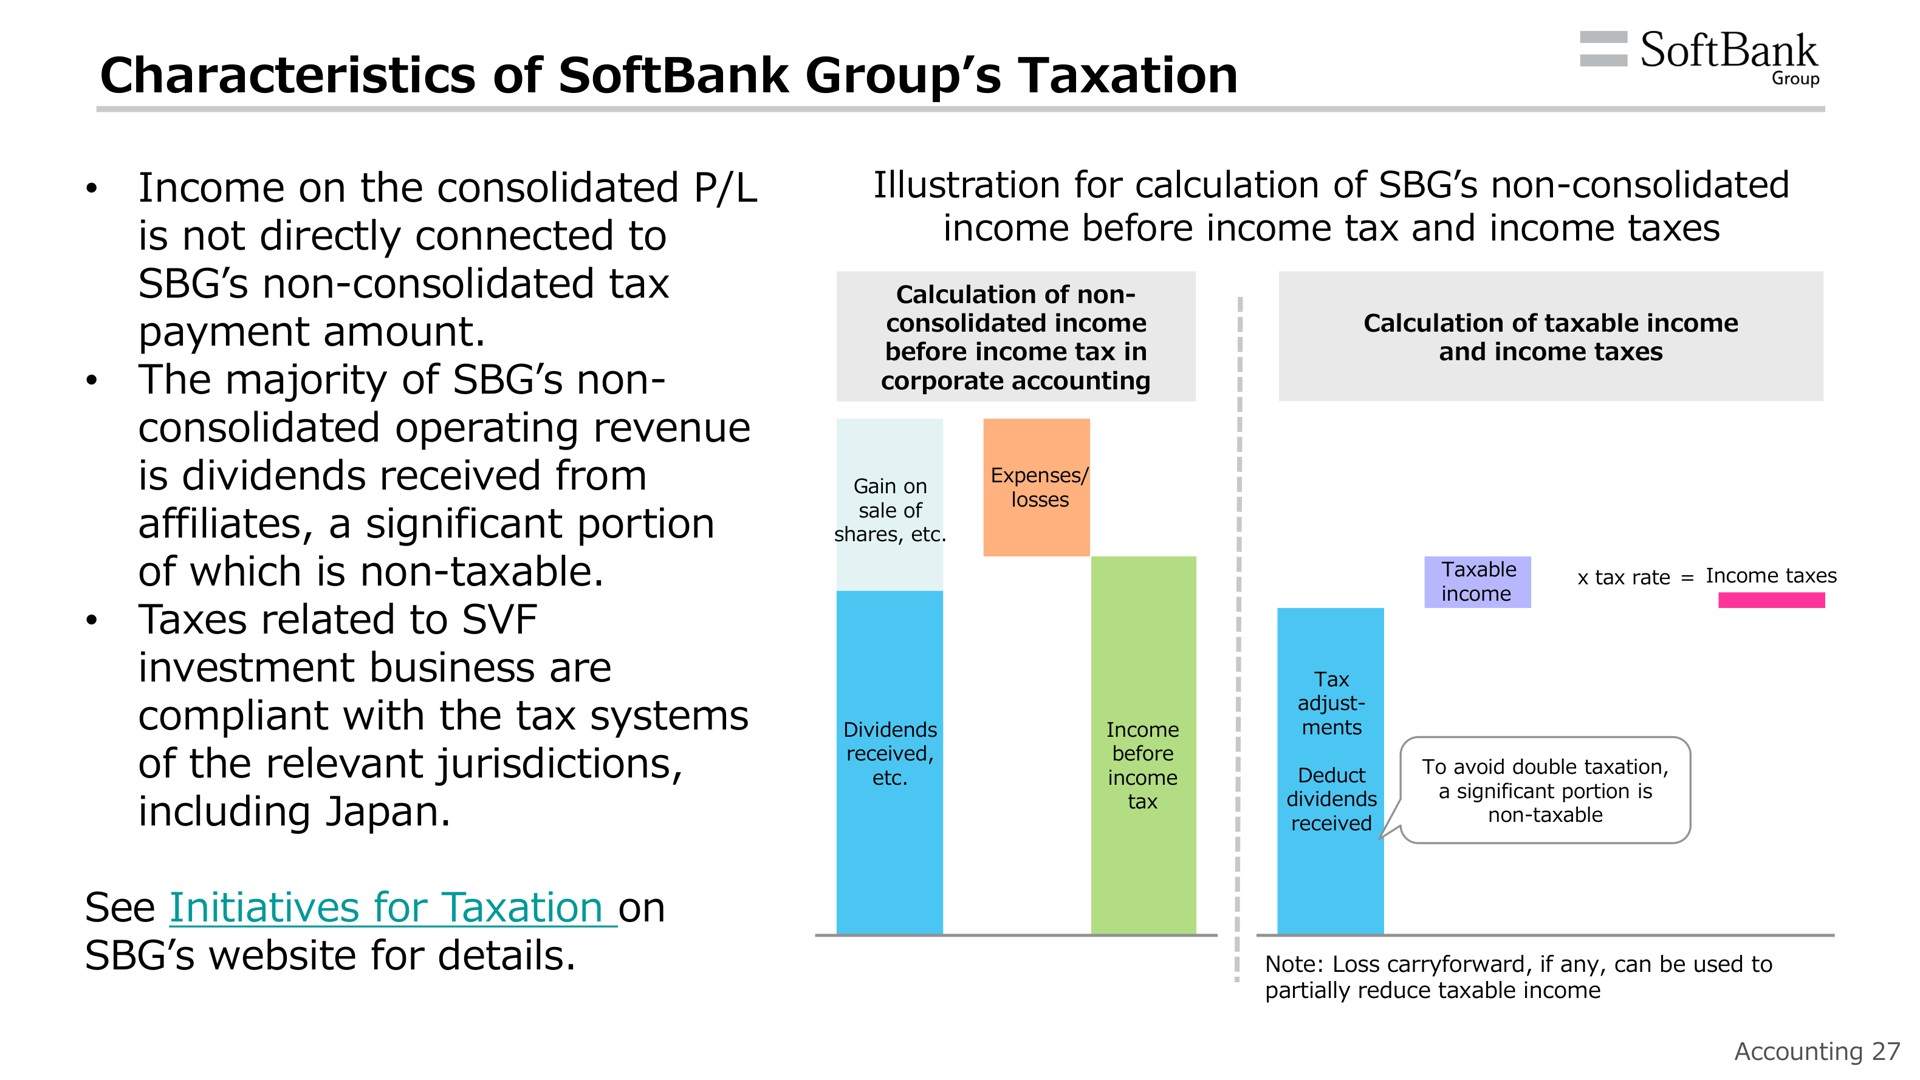 characteristics of group taxation income on the consolidated is not directly connected to non consolidated tax payment amount the majority of non consolidated operating revenue is dividends received from affiliates a significant portion of which is non taxable taxes related to investment business are compliant with the tax systems of the relevant jurisdictions including japan see initiatives for taxation on for details illustration for calculation of non consolidated income before income tax and income taxes | SoftBank